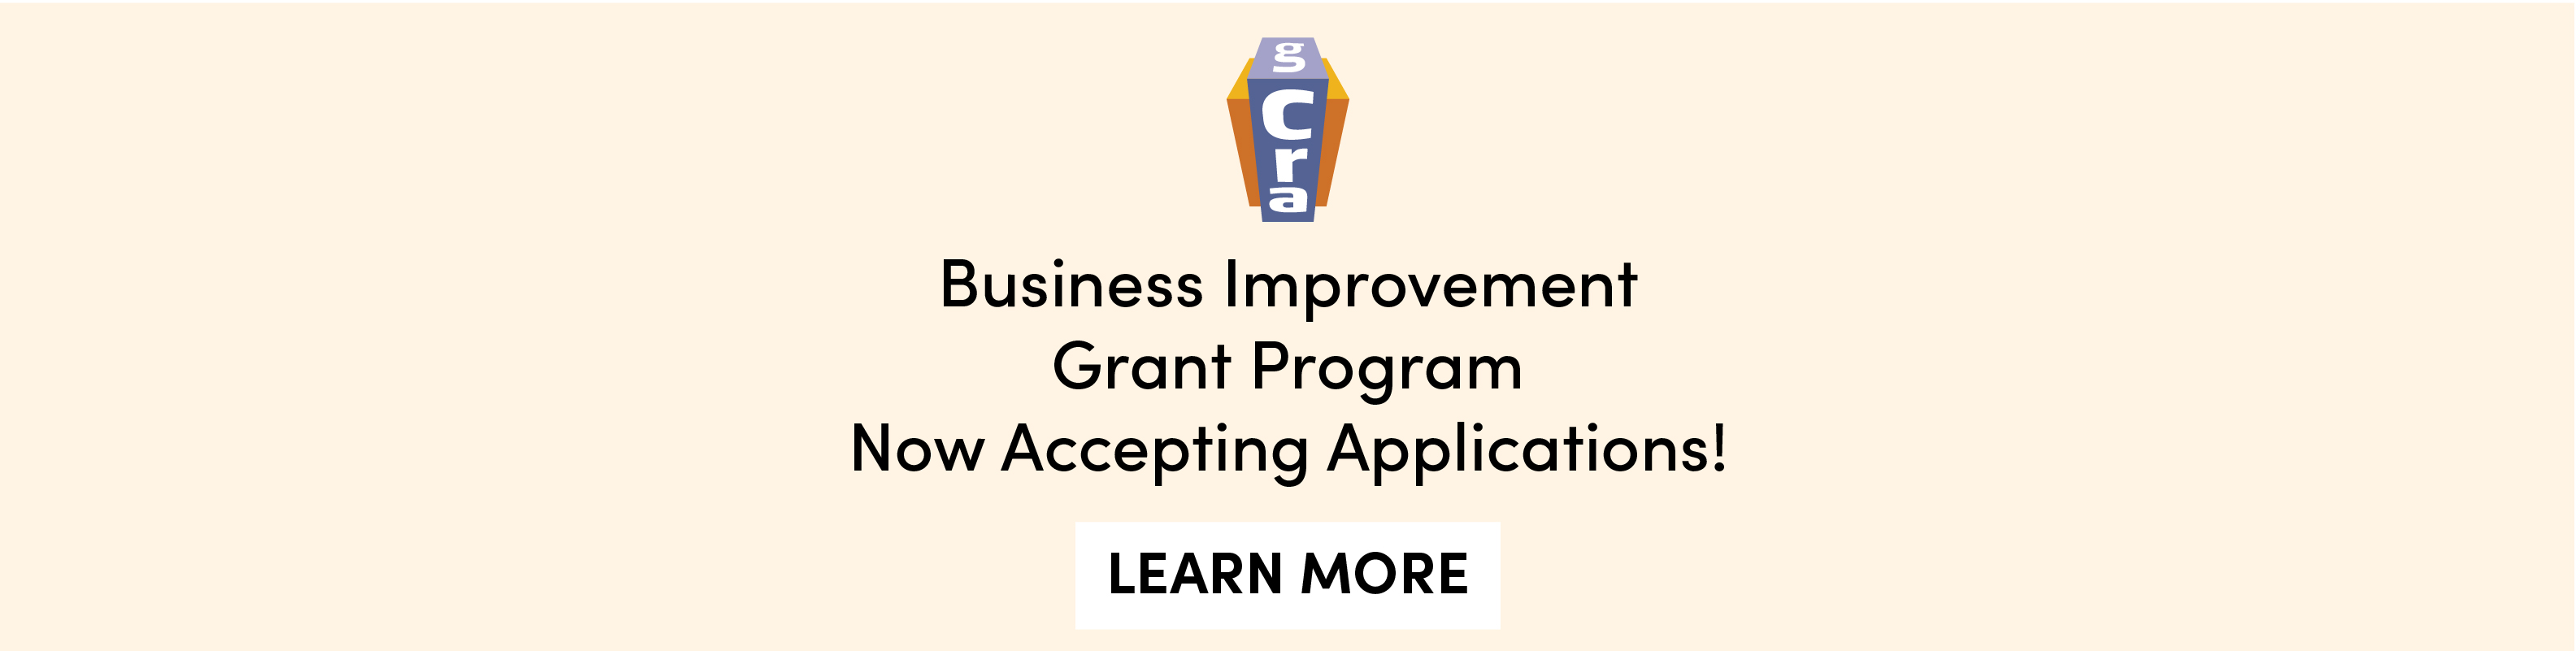 graphic with text: Business Improvement Grant Program Now Accepting Applications